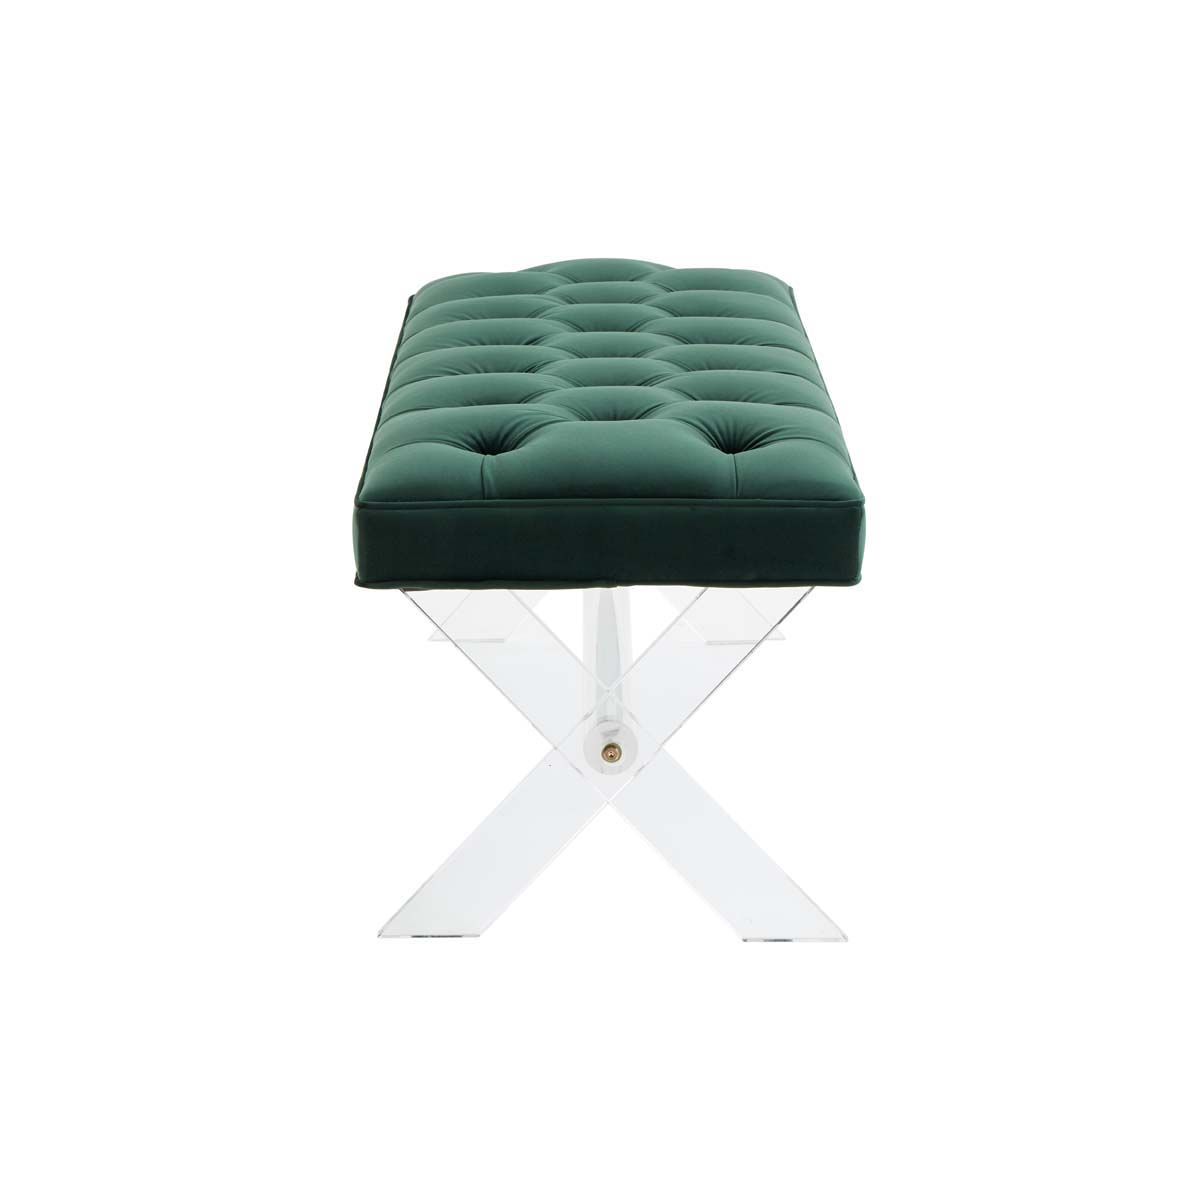 Safavieh Couture Tourmaline Tufted Bench - Forest Green